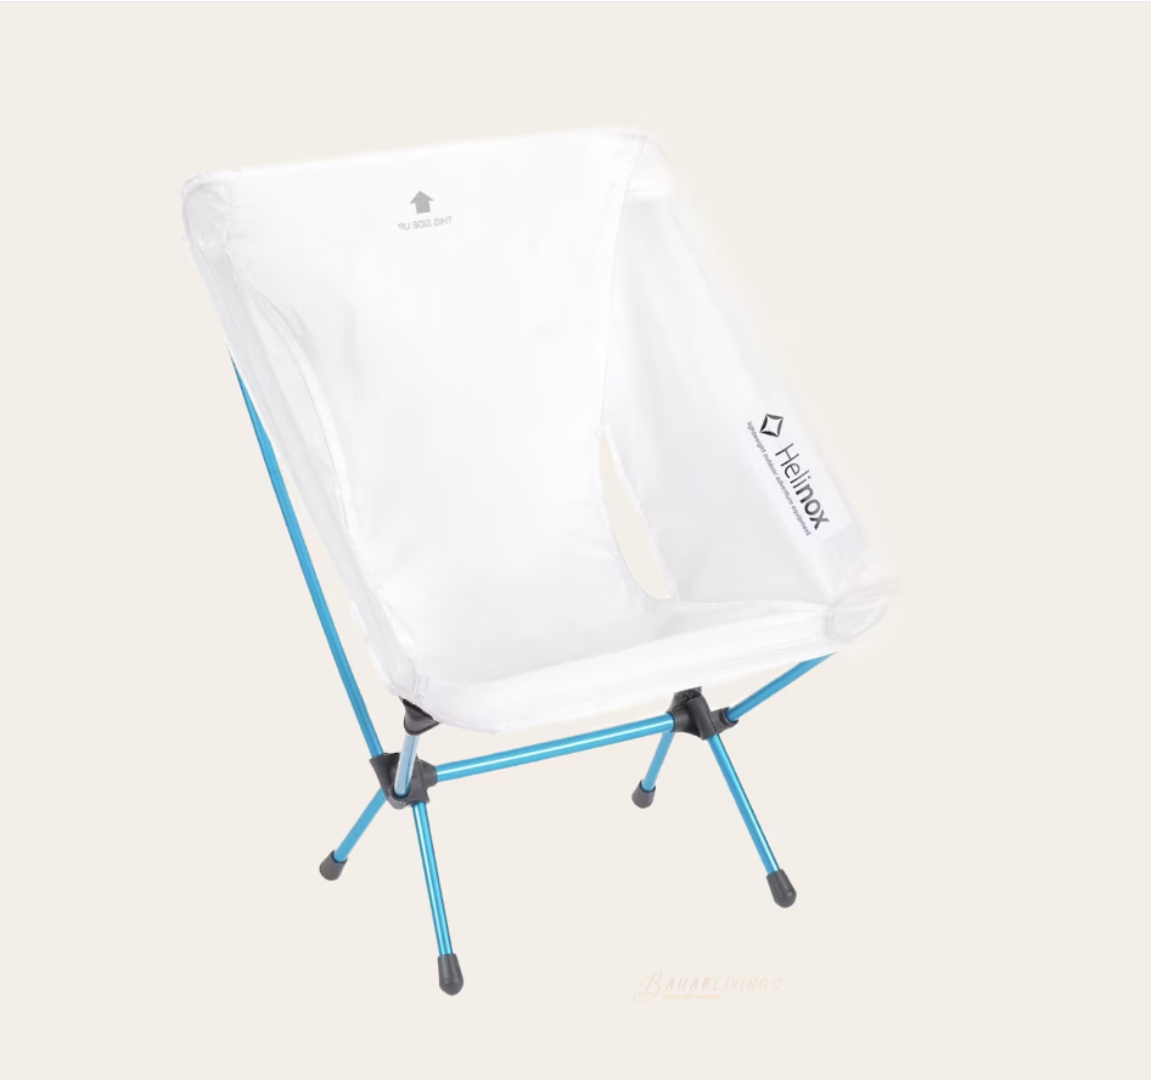 Featherweight Champion: Helinox Chair Zero - Ultimate Lightweight Camping Chair